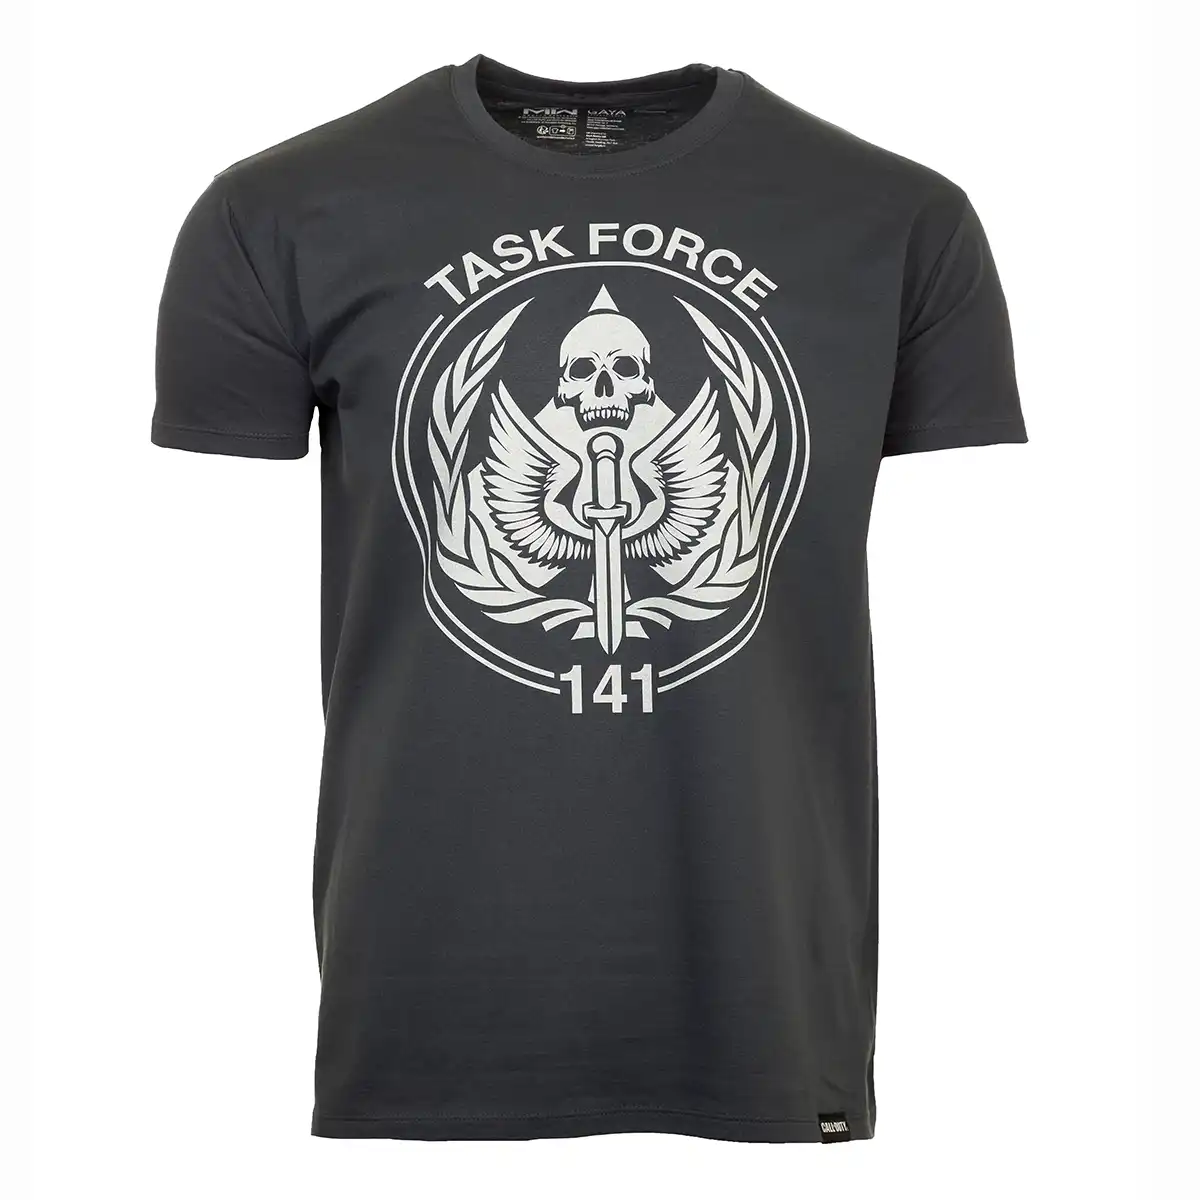 Call of Duty T-Shirt "Task Force Icon" Mousegrey S